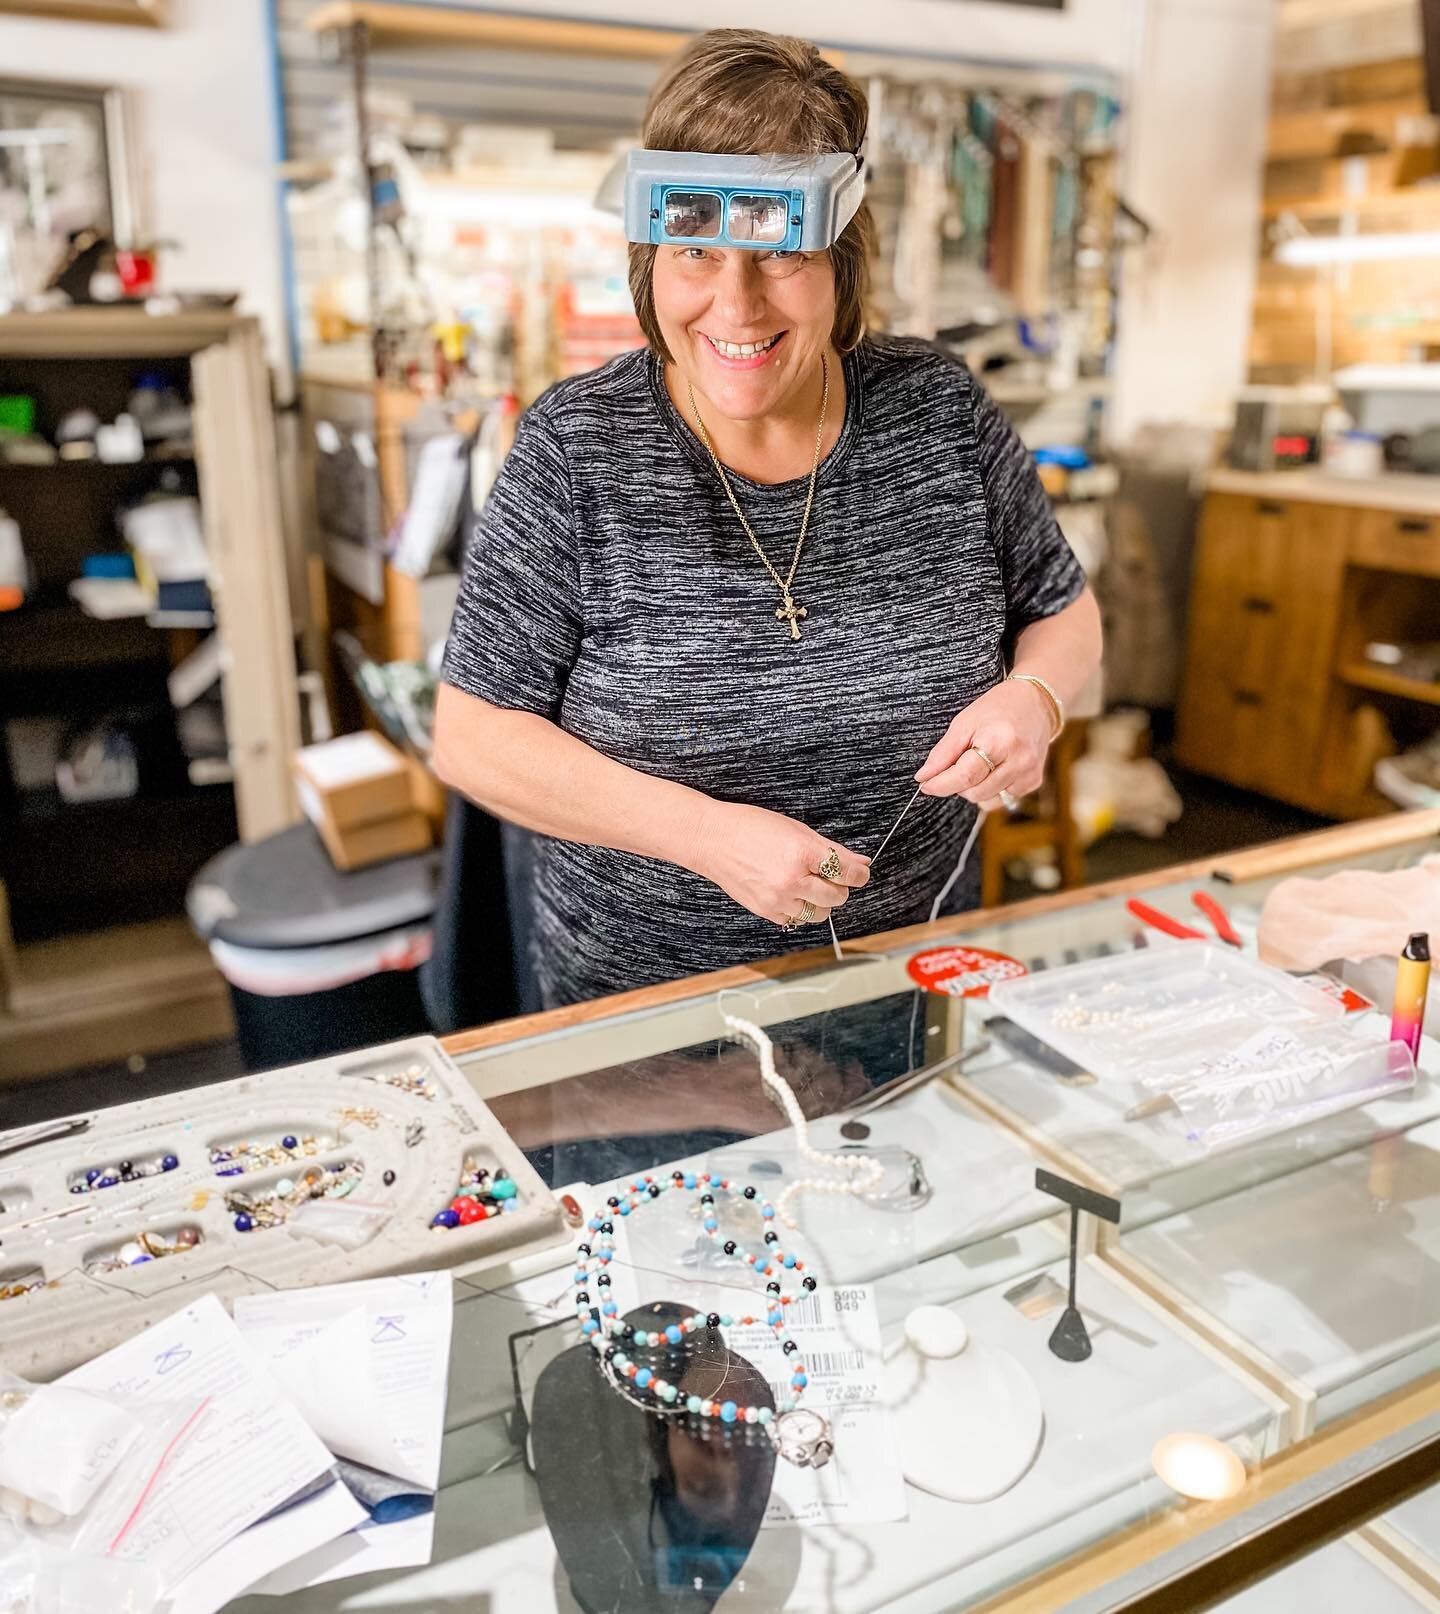 You name it, @wwwholesalejewelrycm does it all&hellip; jewelry, watch repairs, alterations and more! ✨

Fun fact&hellip; they opened their doors in 1985 and the business has stayed in the family ever since! &bull;
&bull;
&bull;
#ShopLocal #ShopSmall 